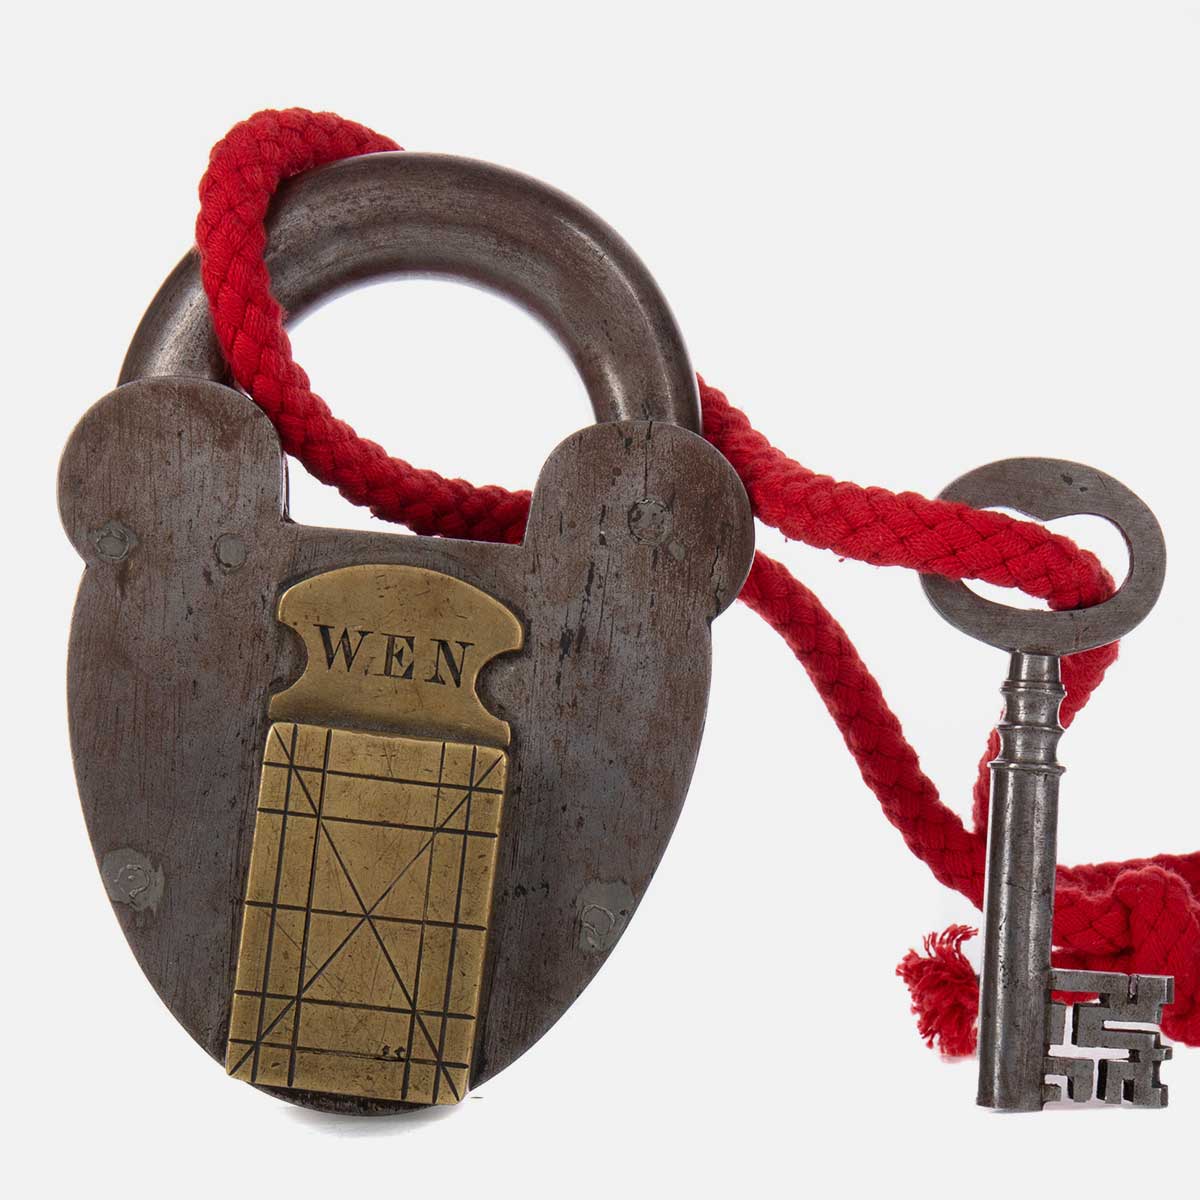 Victorian padlock opens up a world of Olympic history